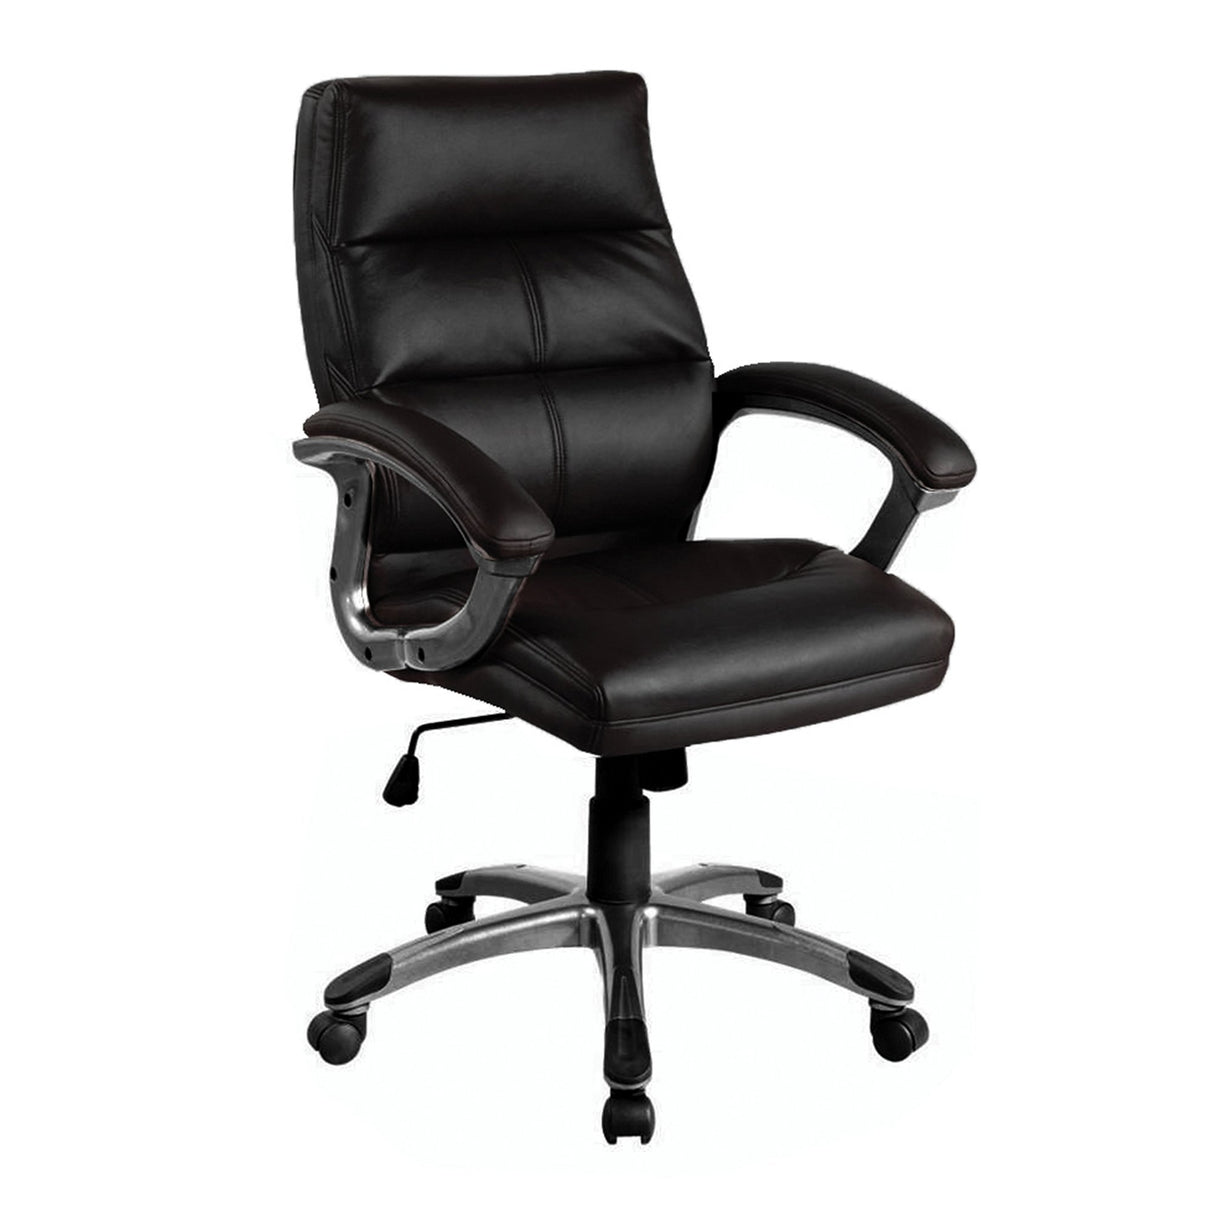 Nautilus Designs Greenwich High Back Leather Effect Executive Armchair with Silver Detailed Black Nylon Base - Black